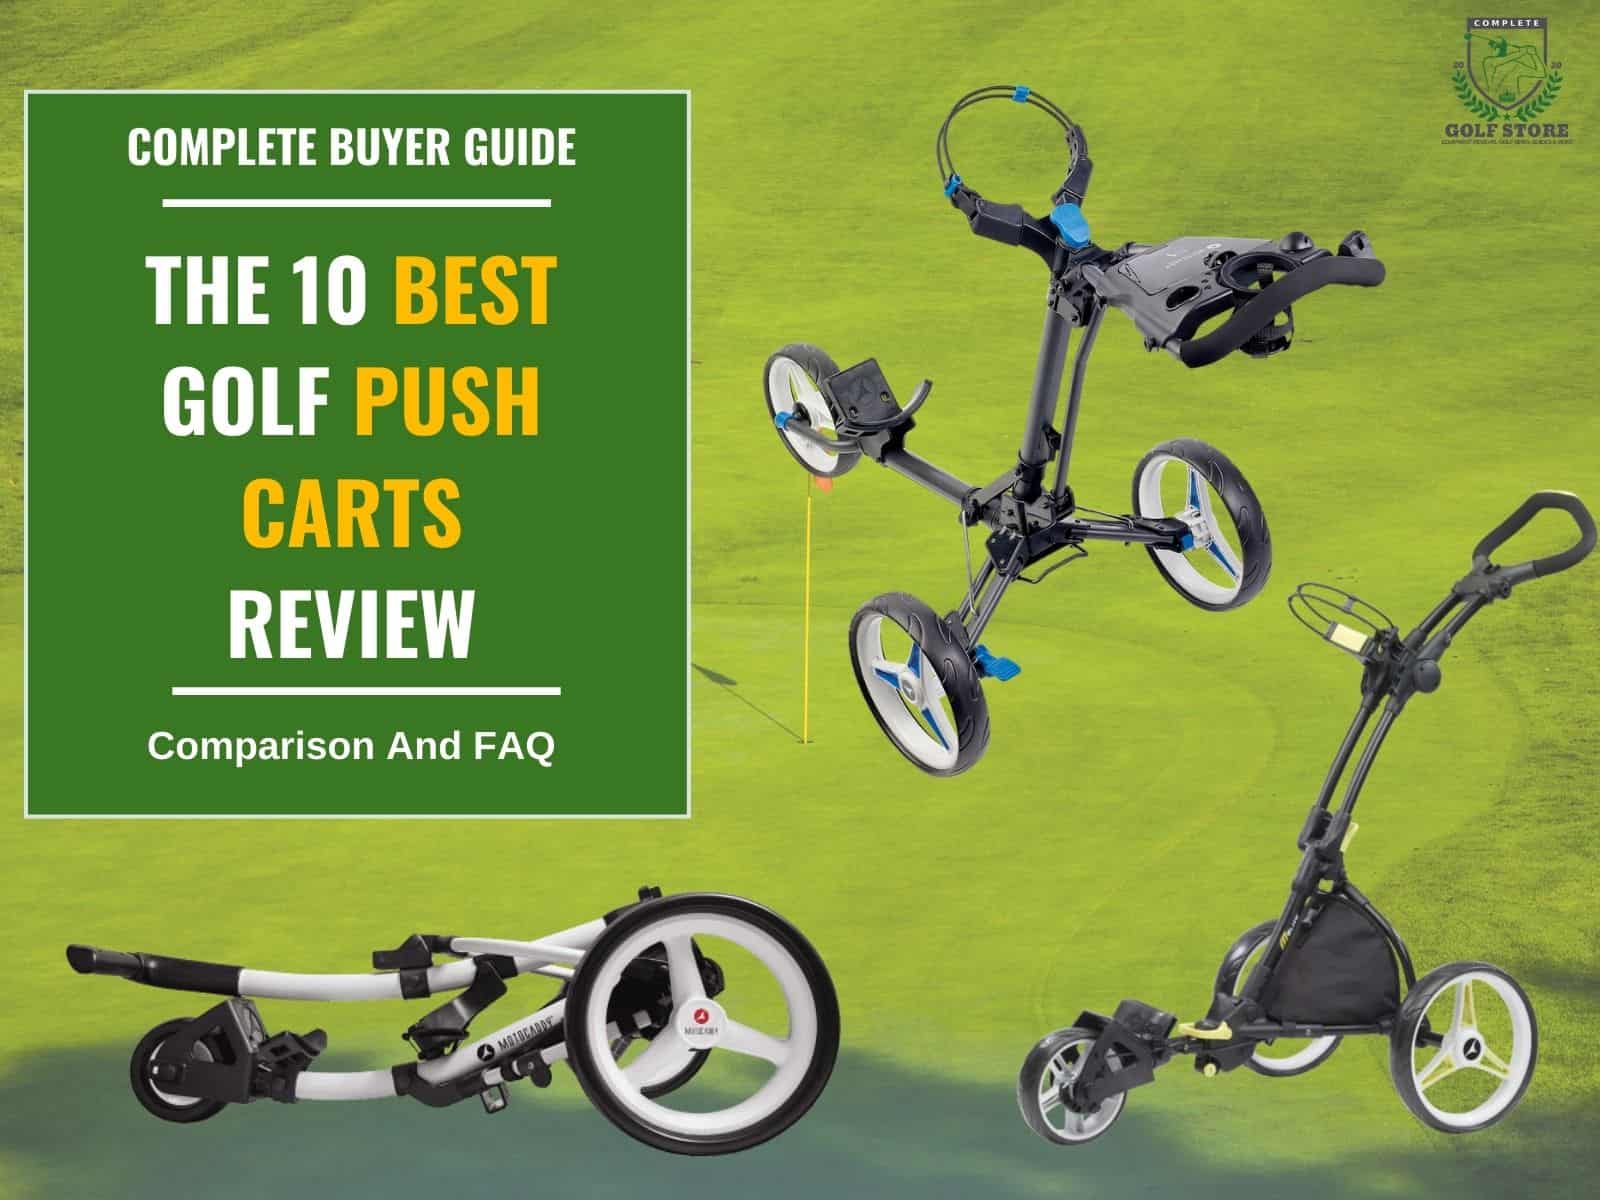 The 10 Best Golf Push Carts Review